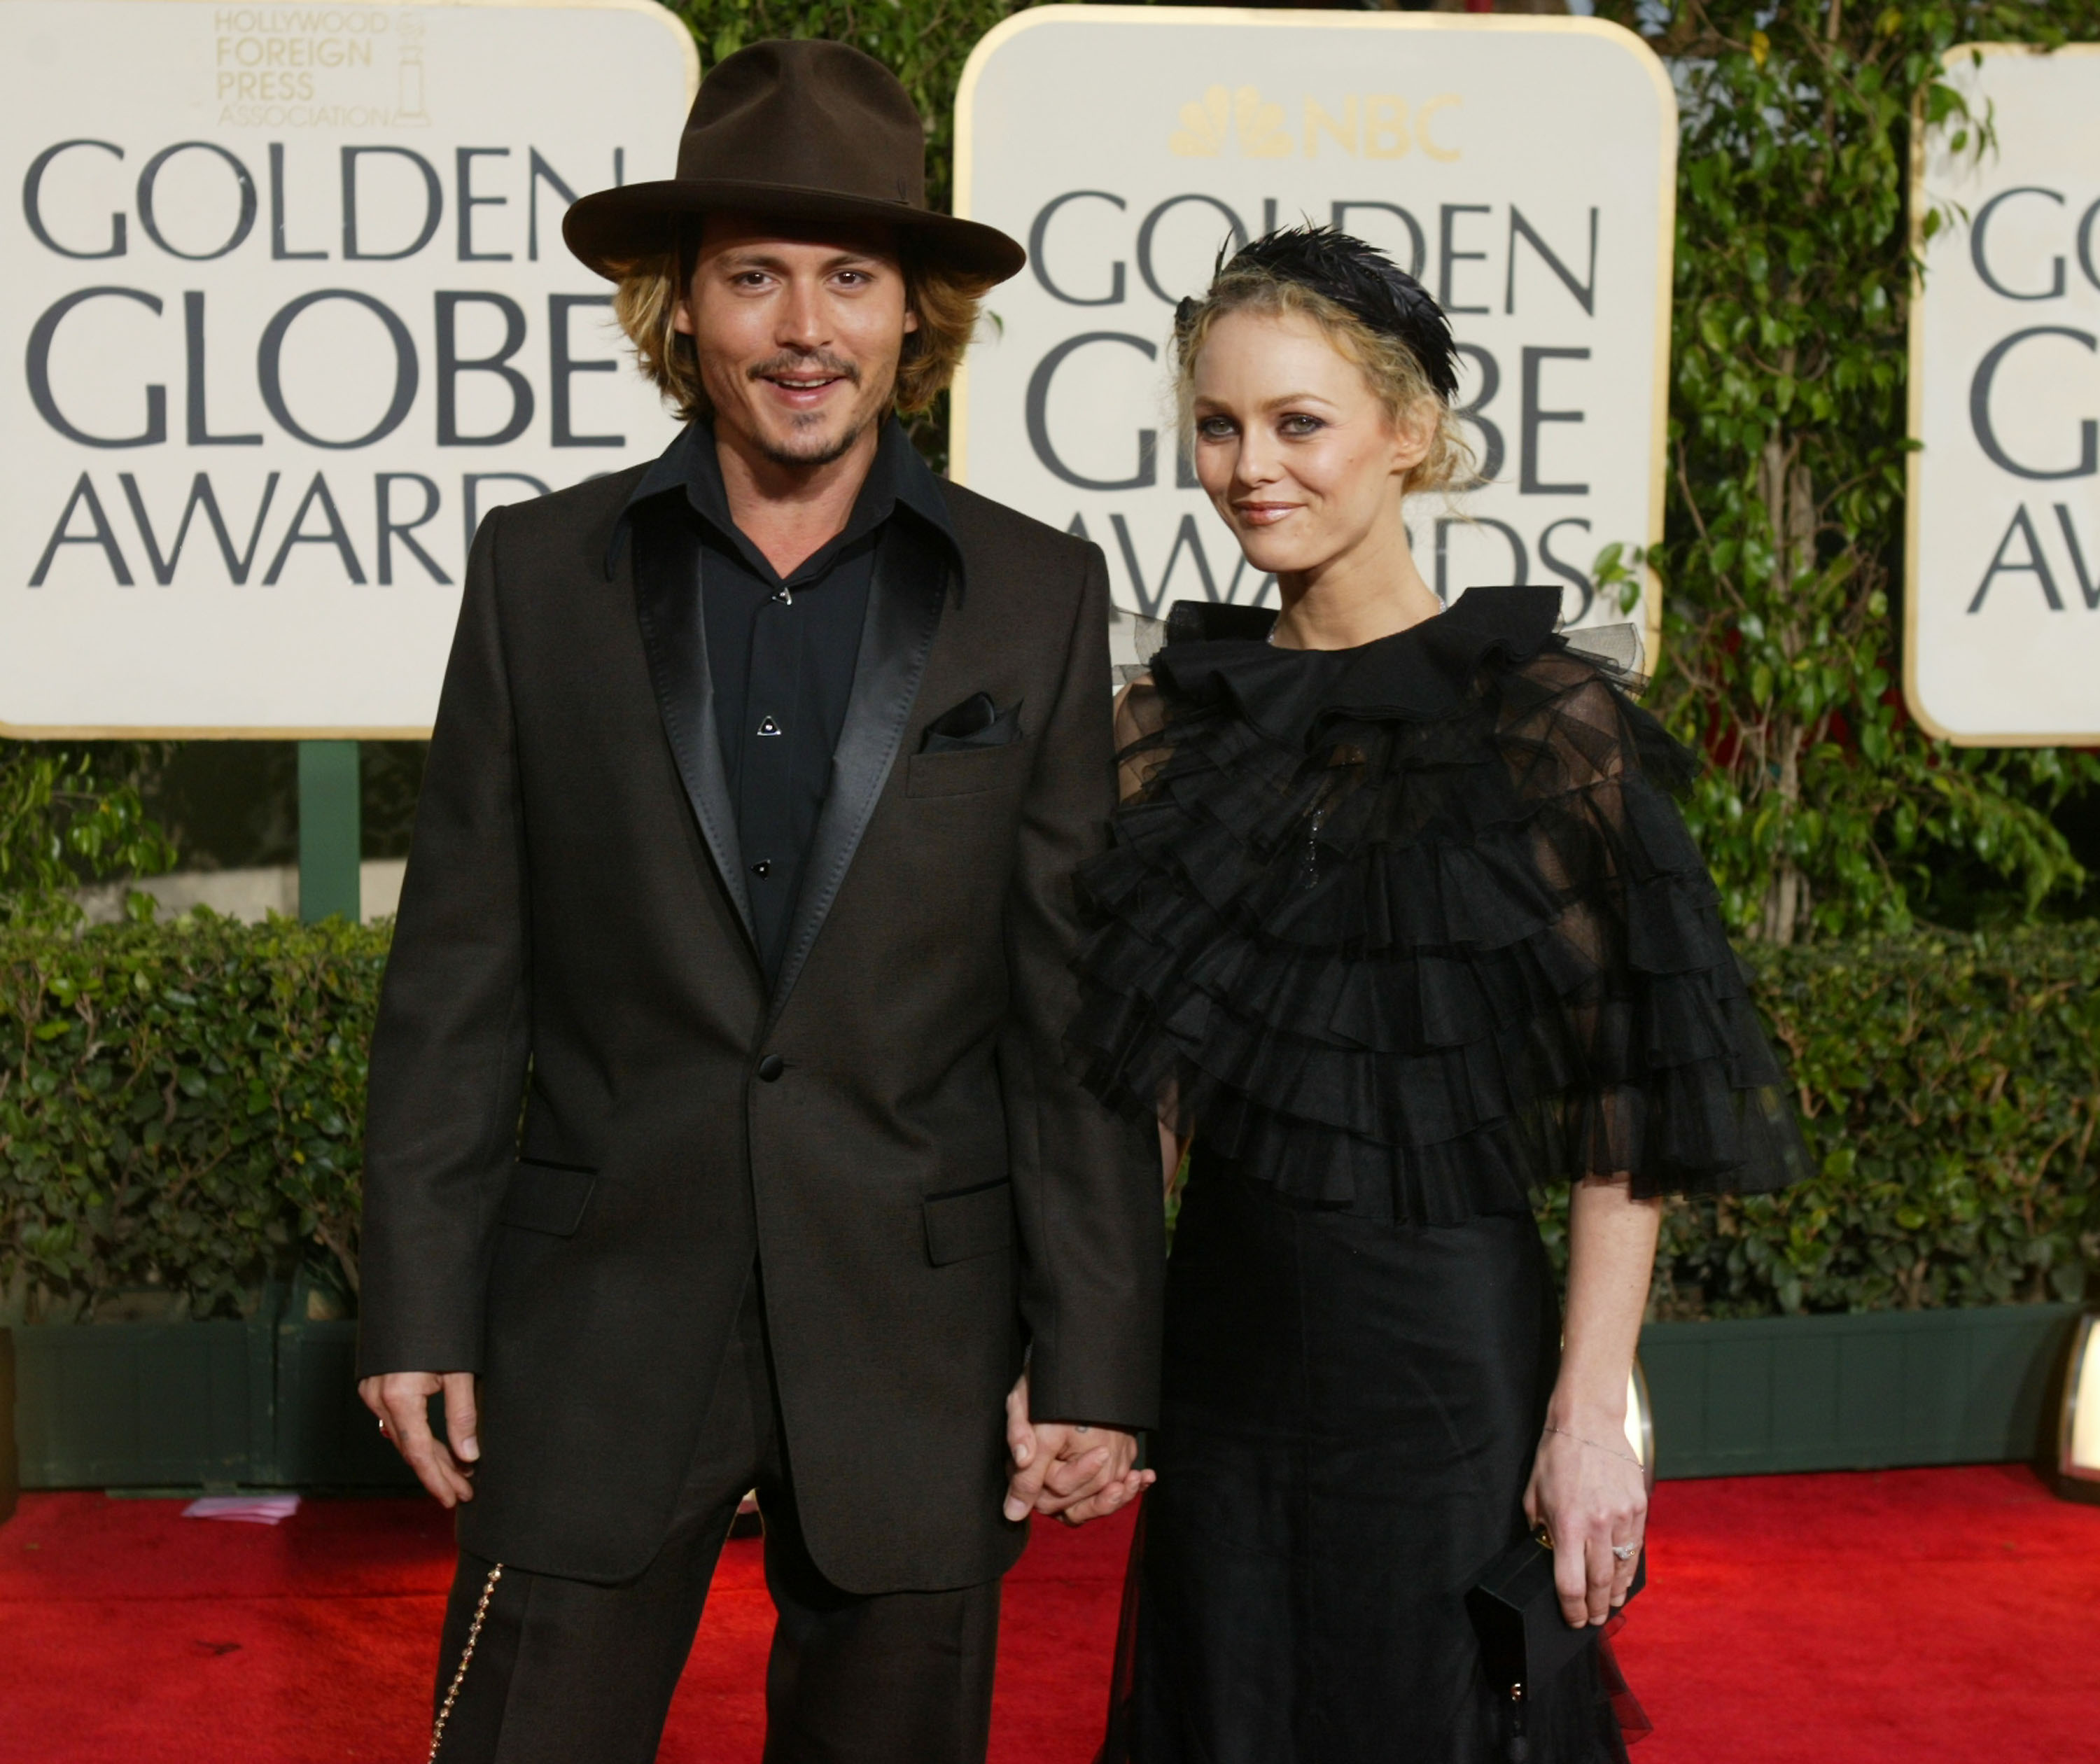 Johnny Depp and Vanessa Paradis at the 61st Annual Golden Globe Awards in Beverly Hills, California on January 25, 2004 | Source: Getty Images